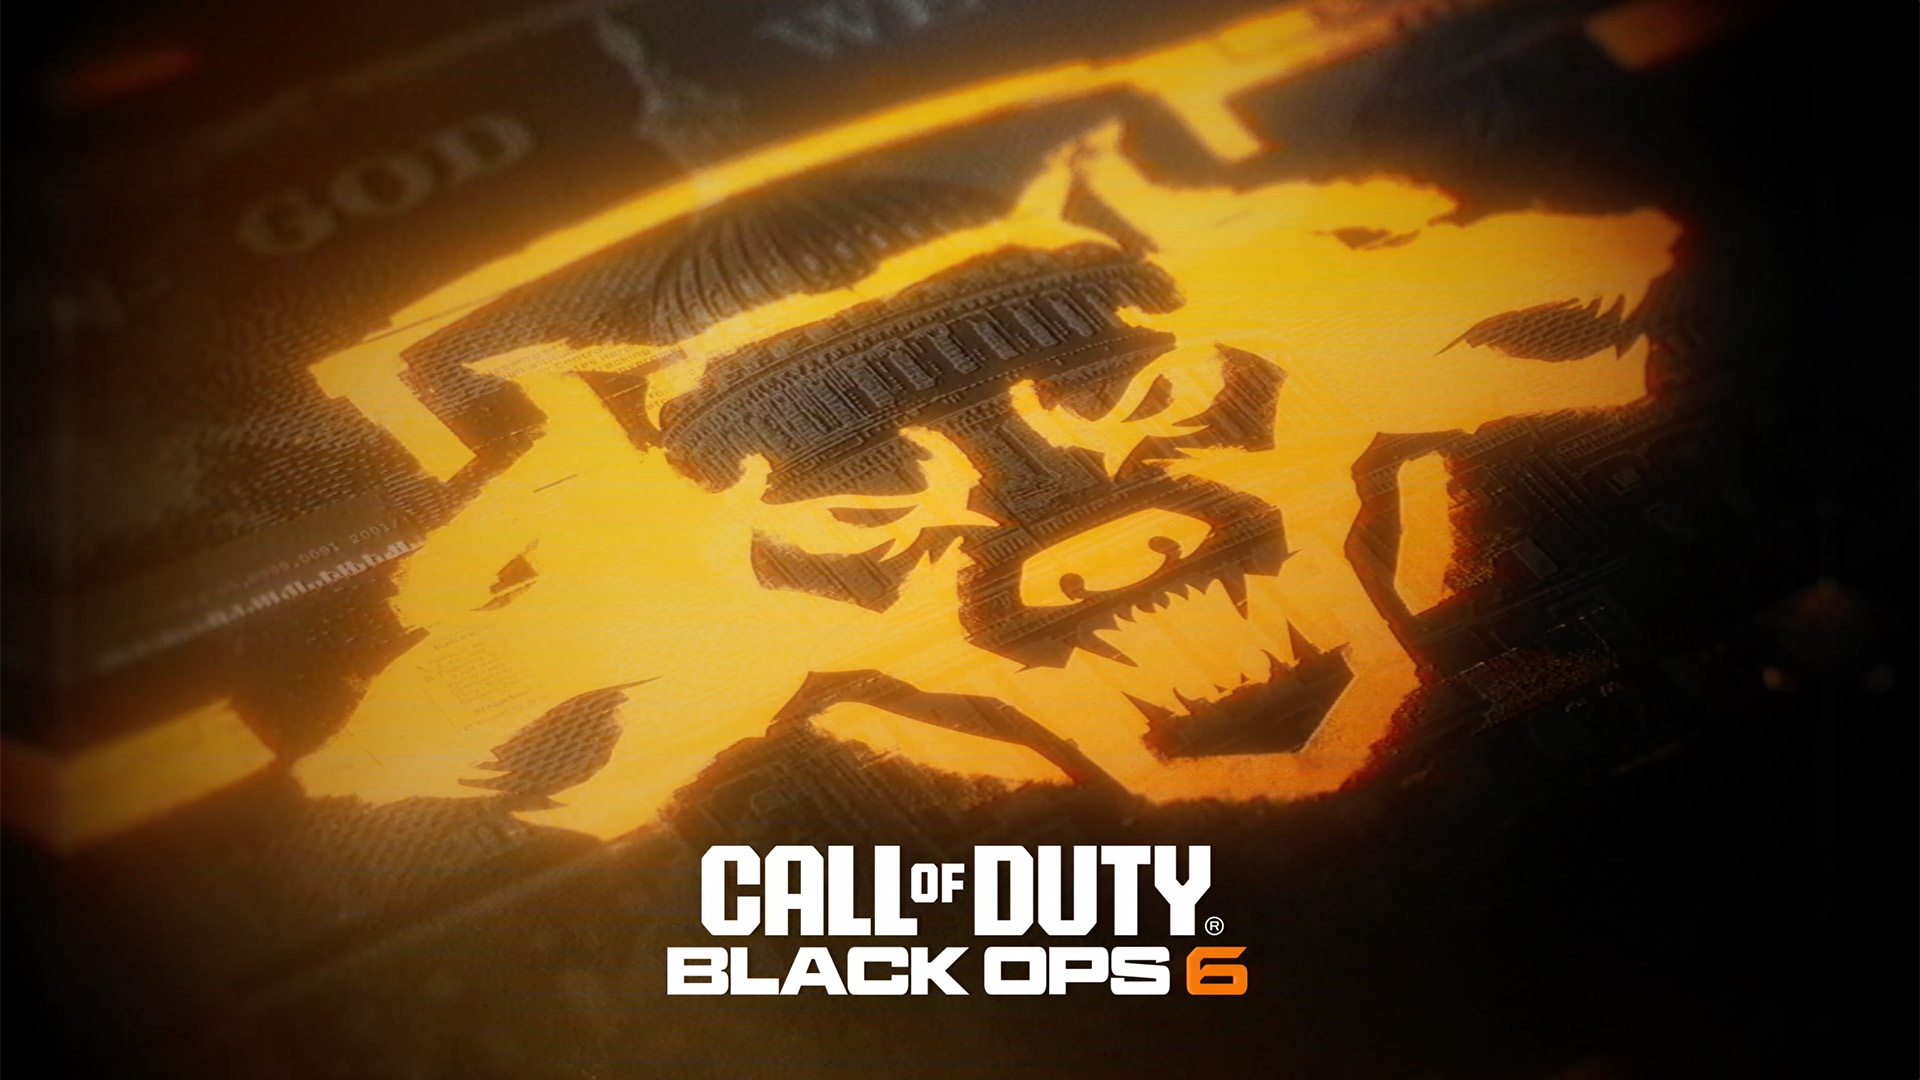 Call of Duty: Black Ops 6 will arrive on Xbox Game Pass on day one, confirms Microsoft.